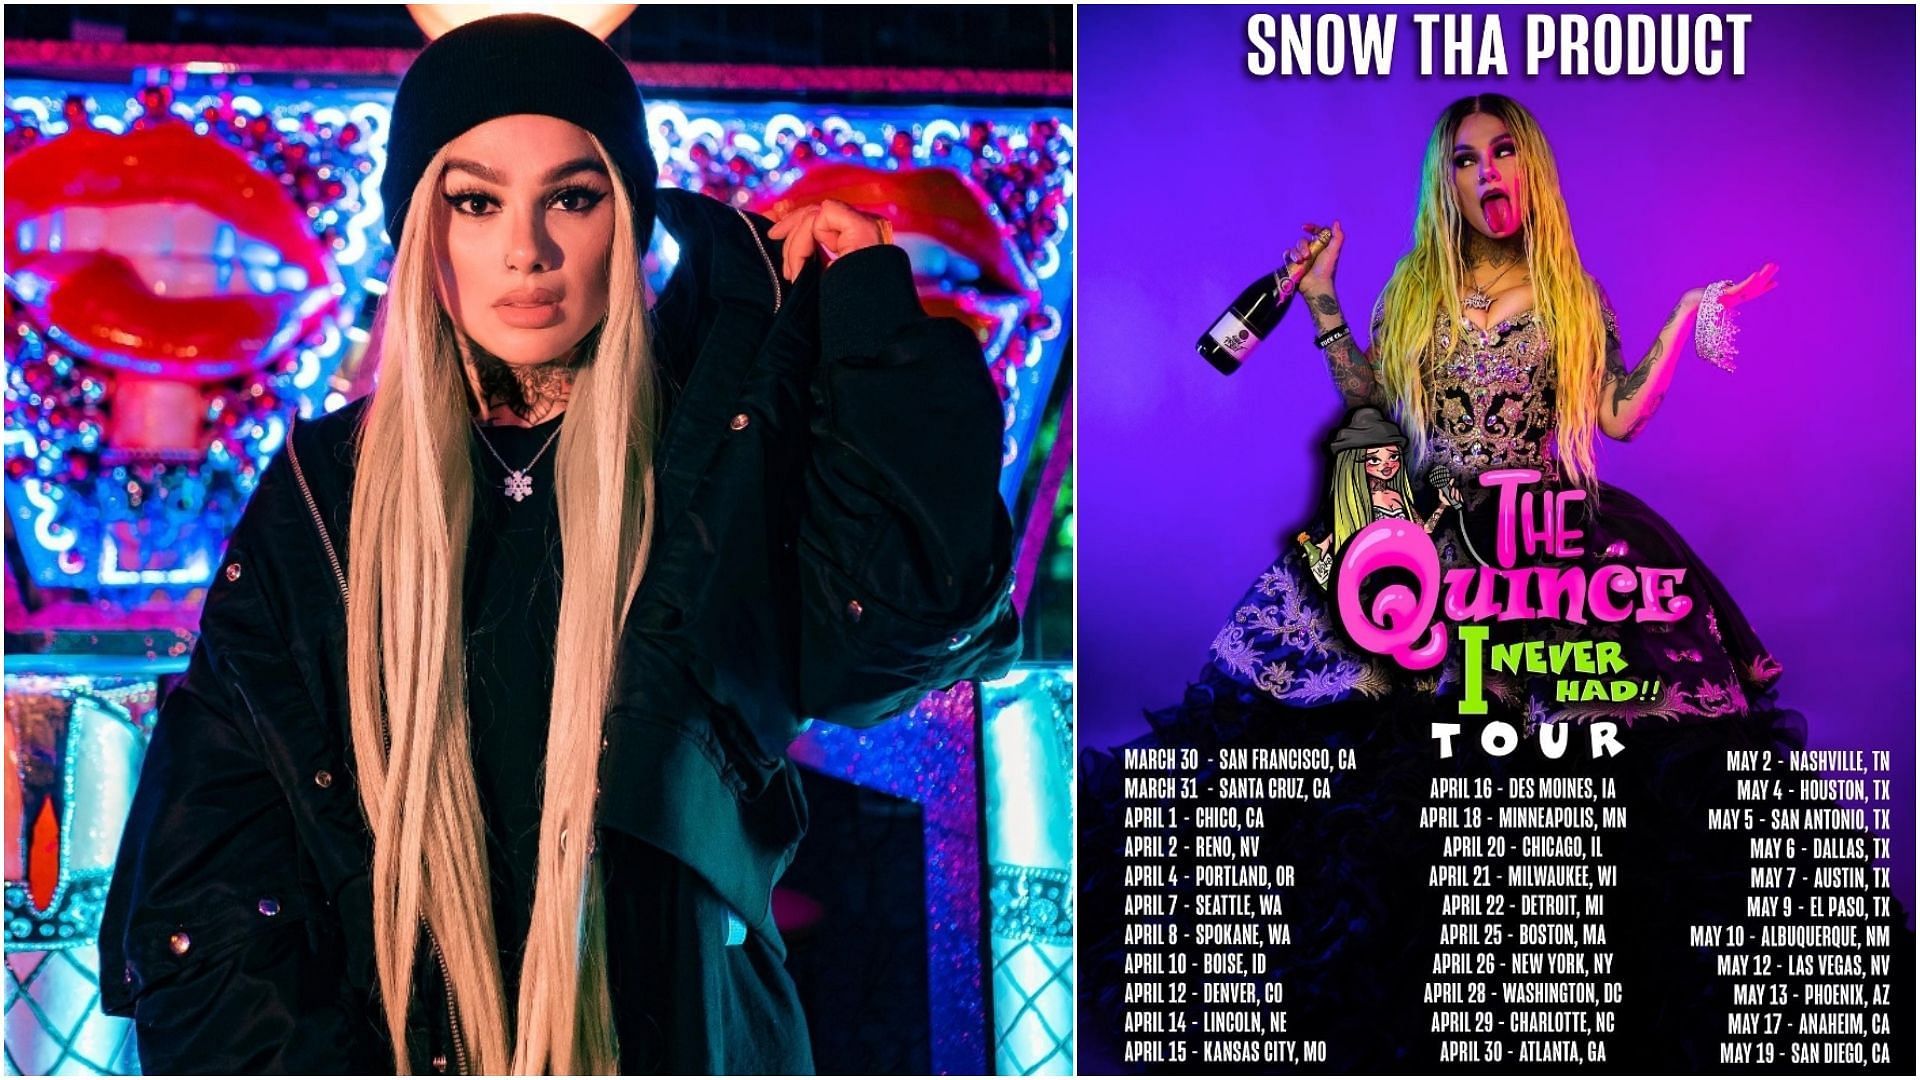 Snow Tha Product Tour 2023 Tickets, presale, where to buy, dates